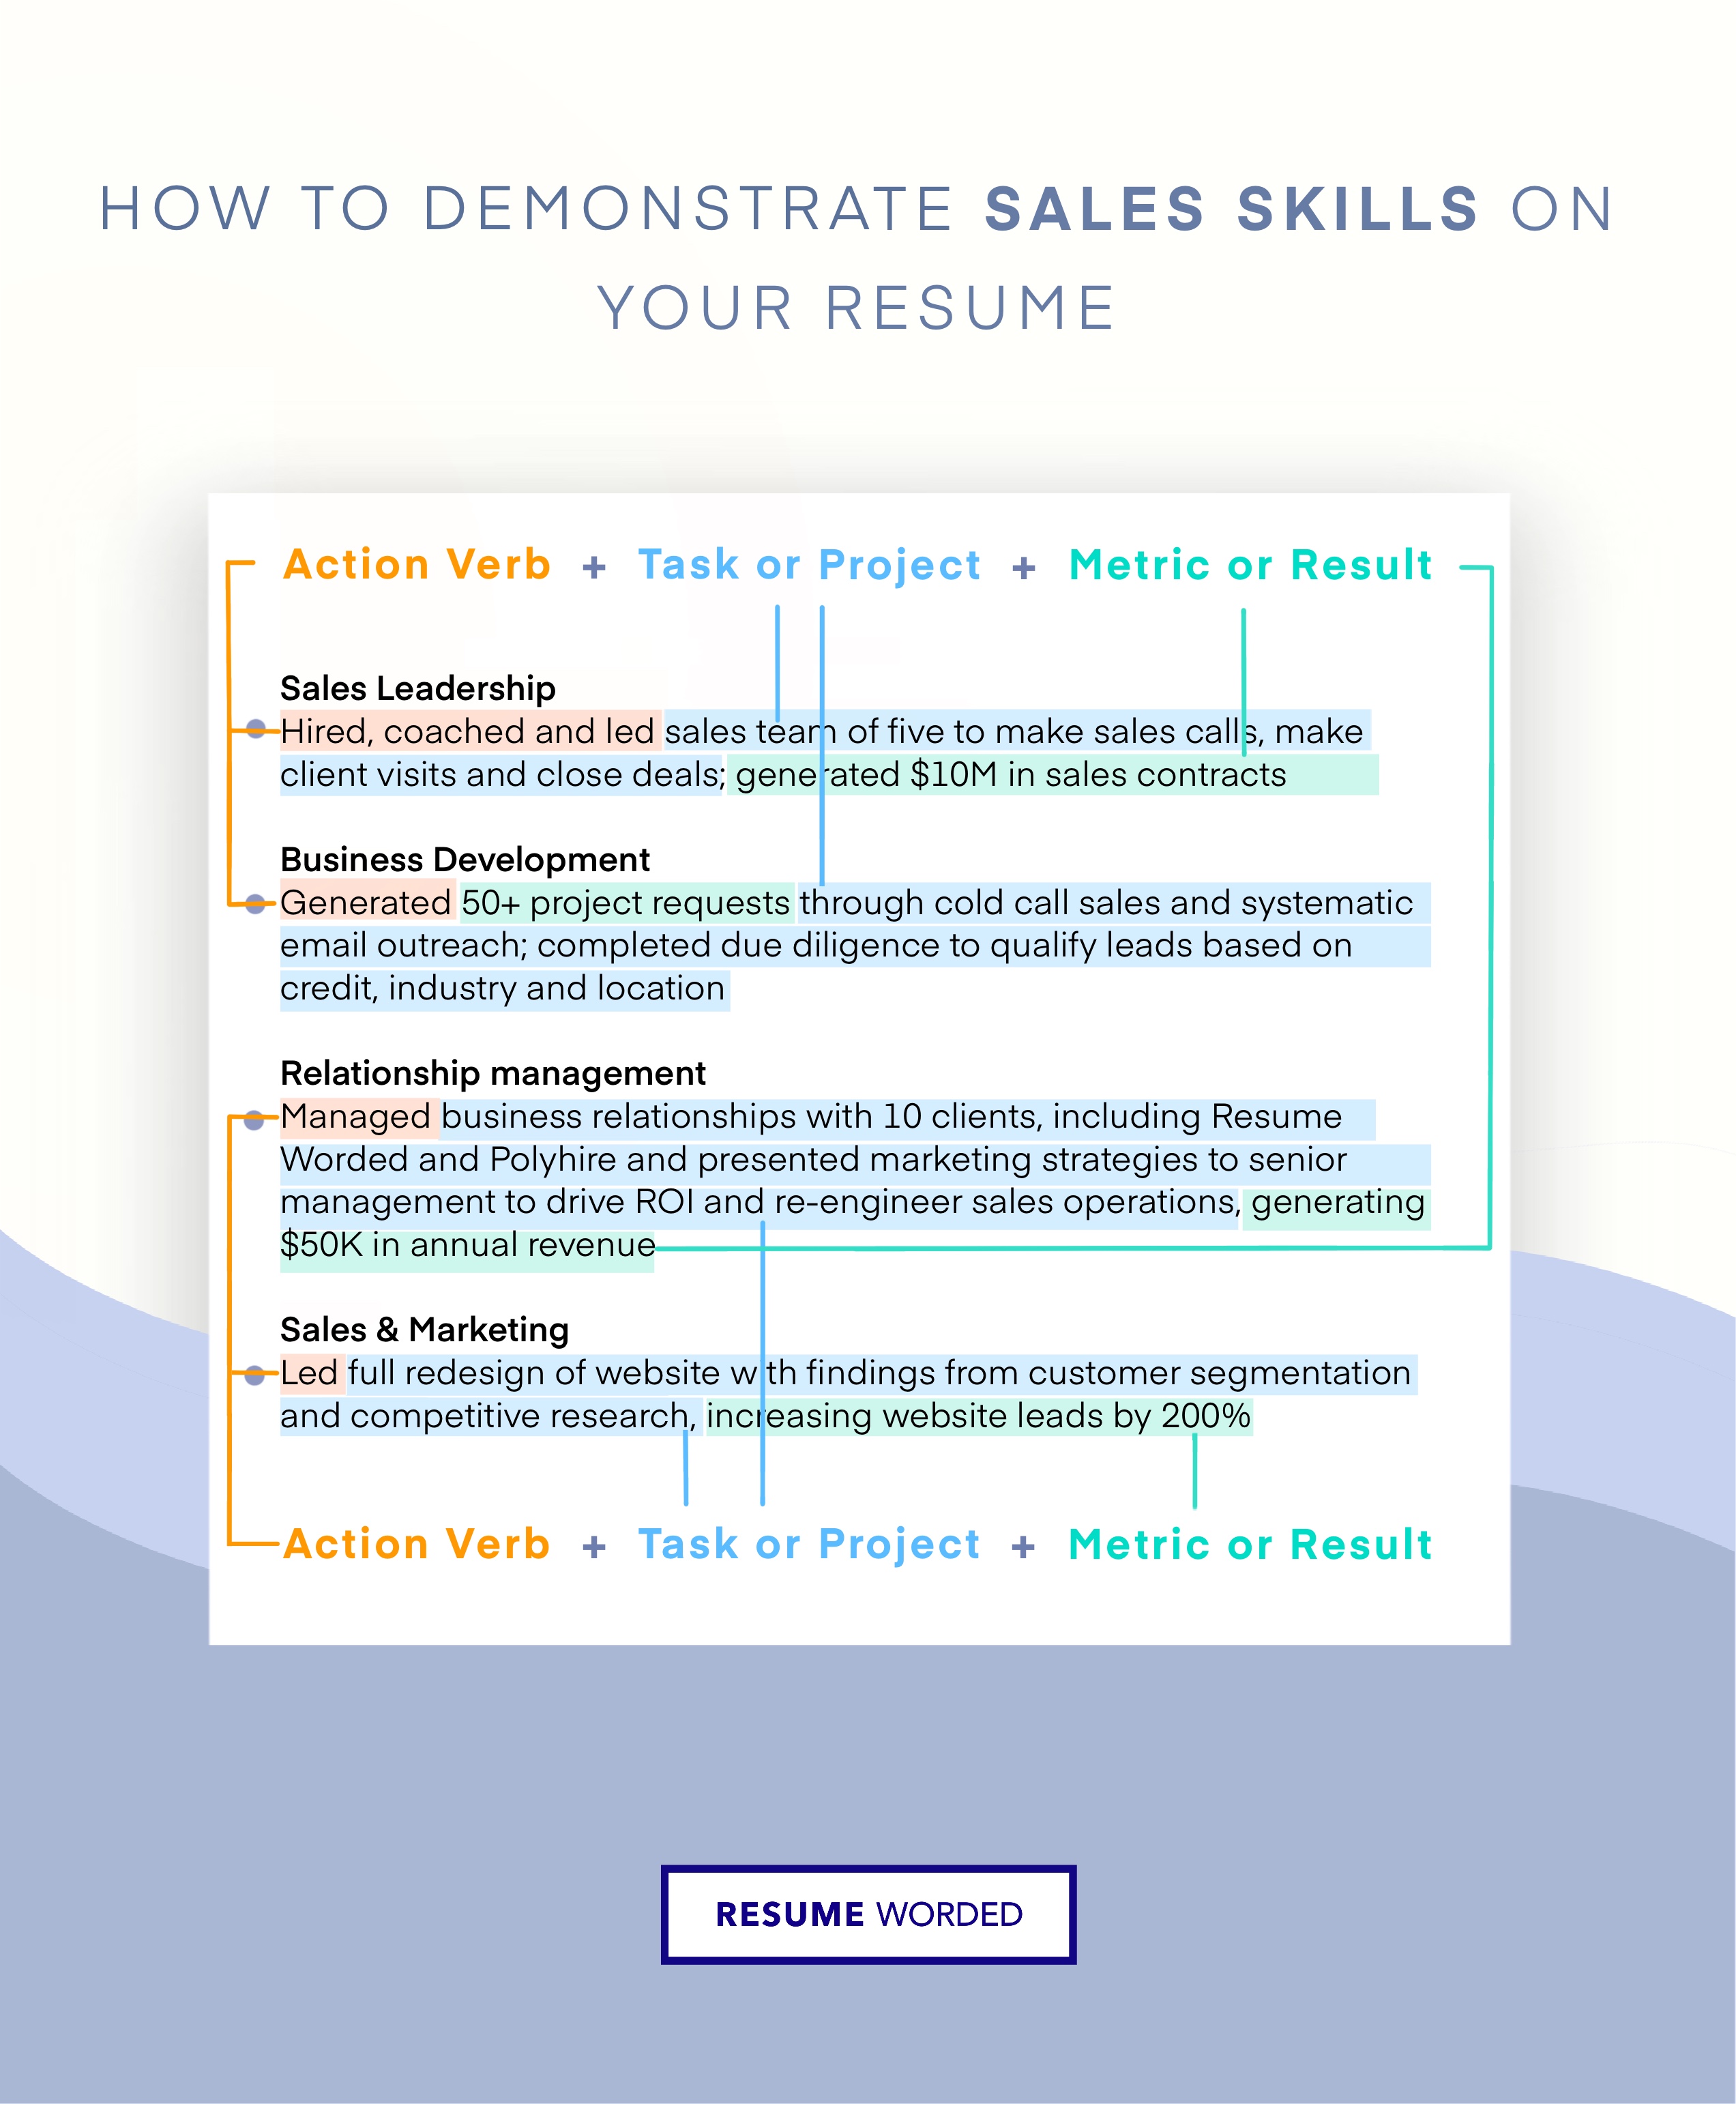 Emphasize meeting sales goals and increased revenue - Digital Marketing Director Resume